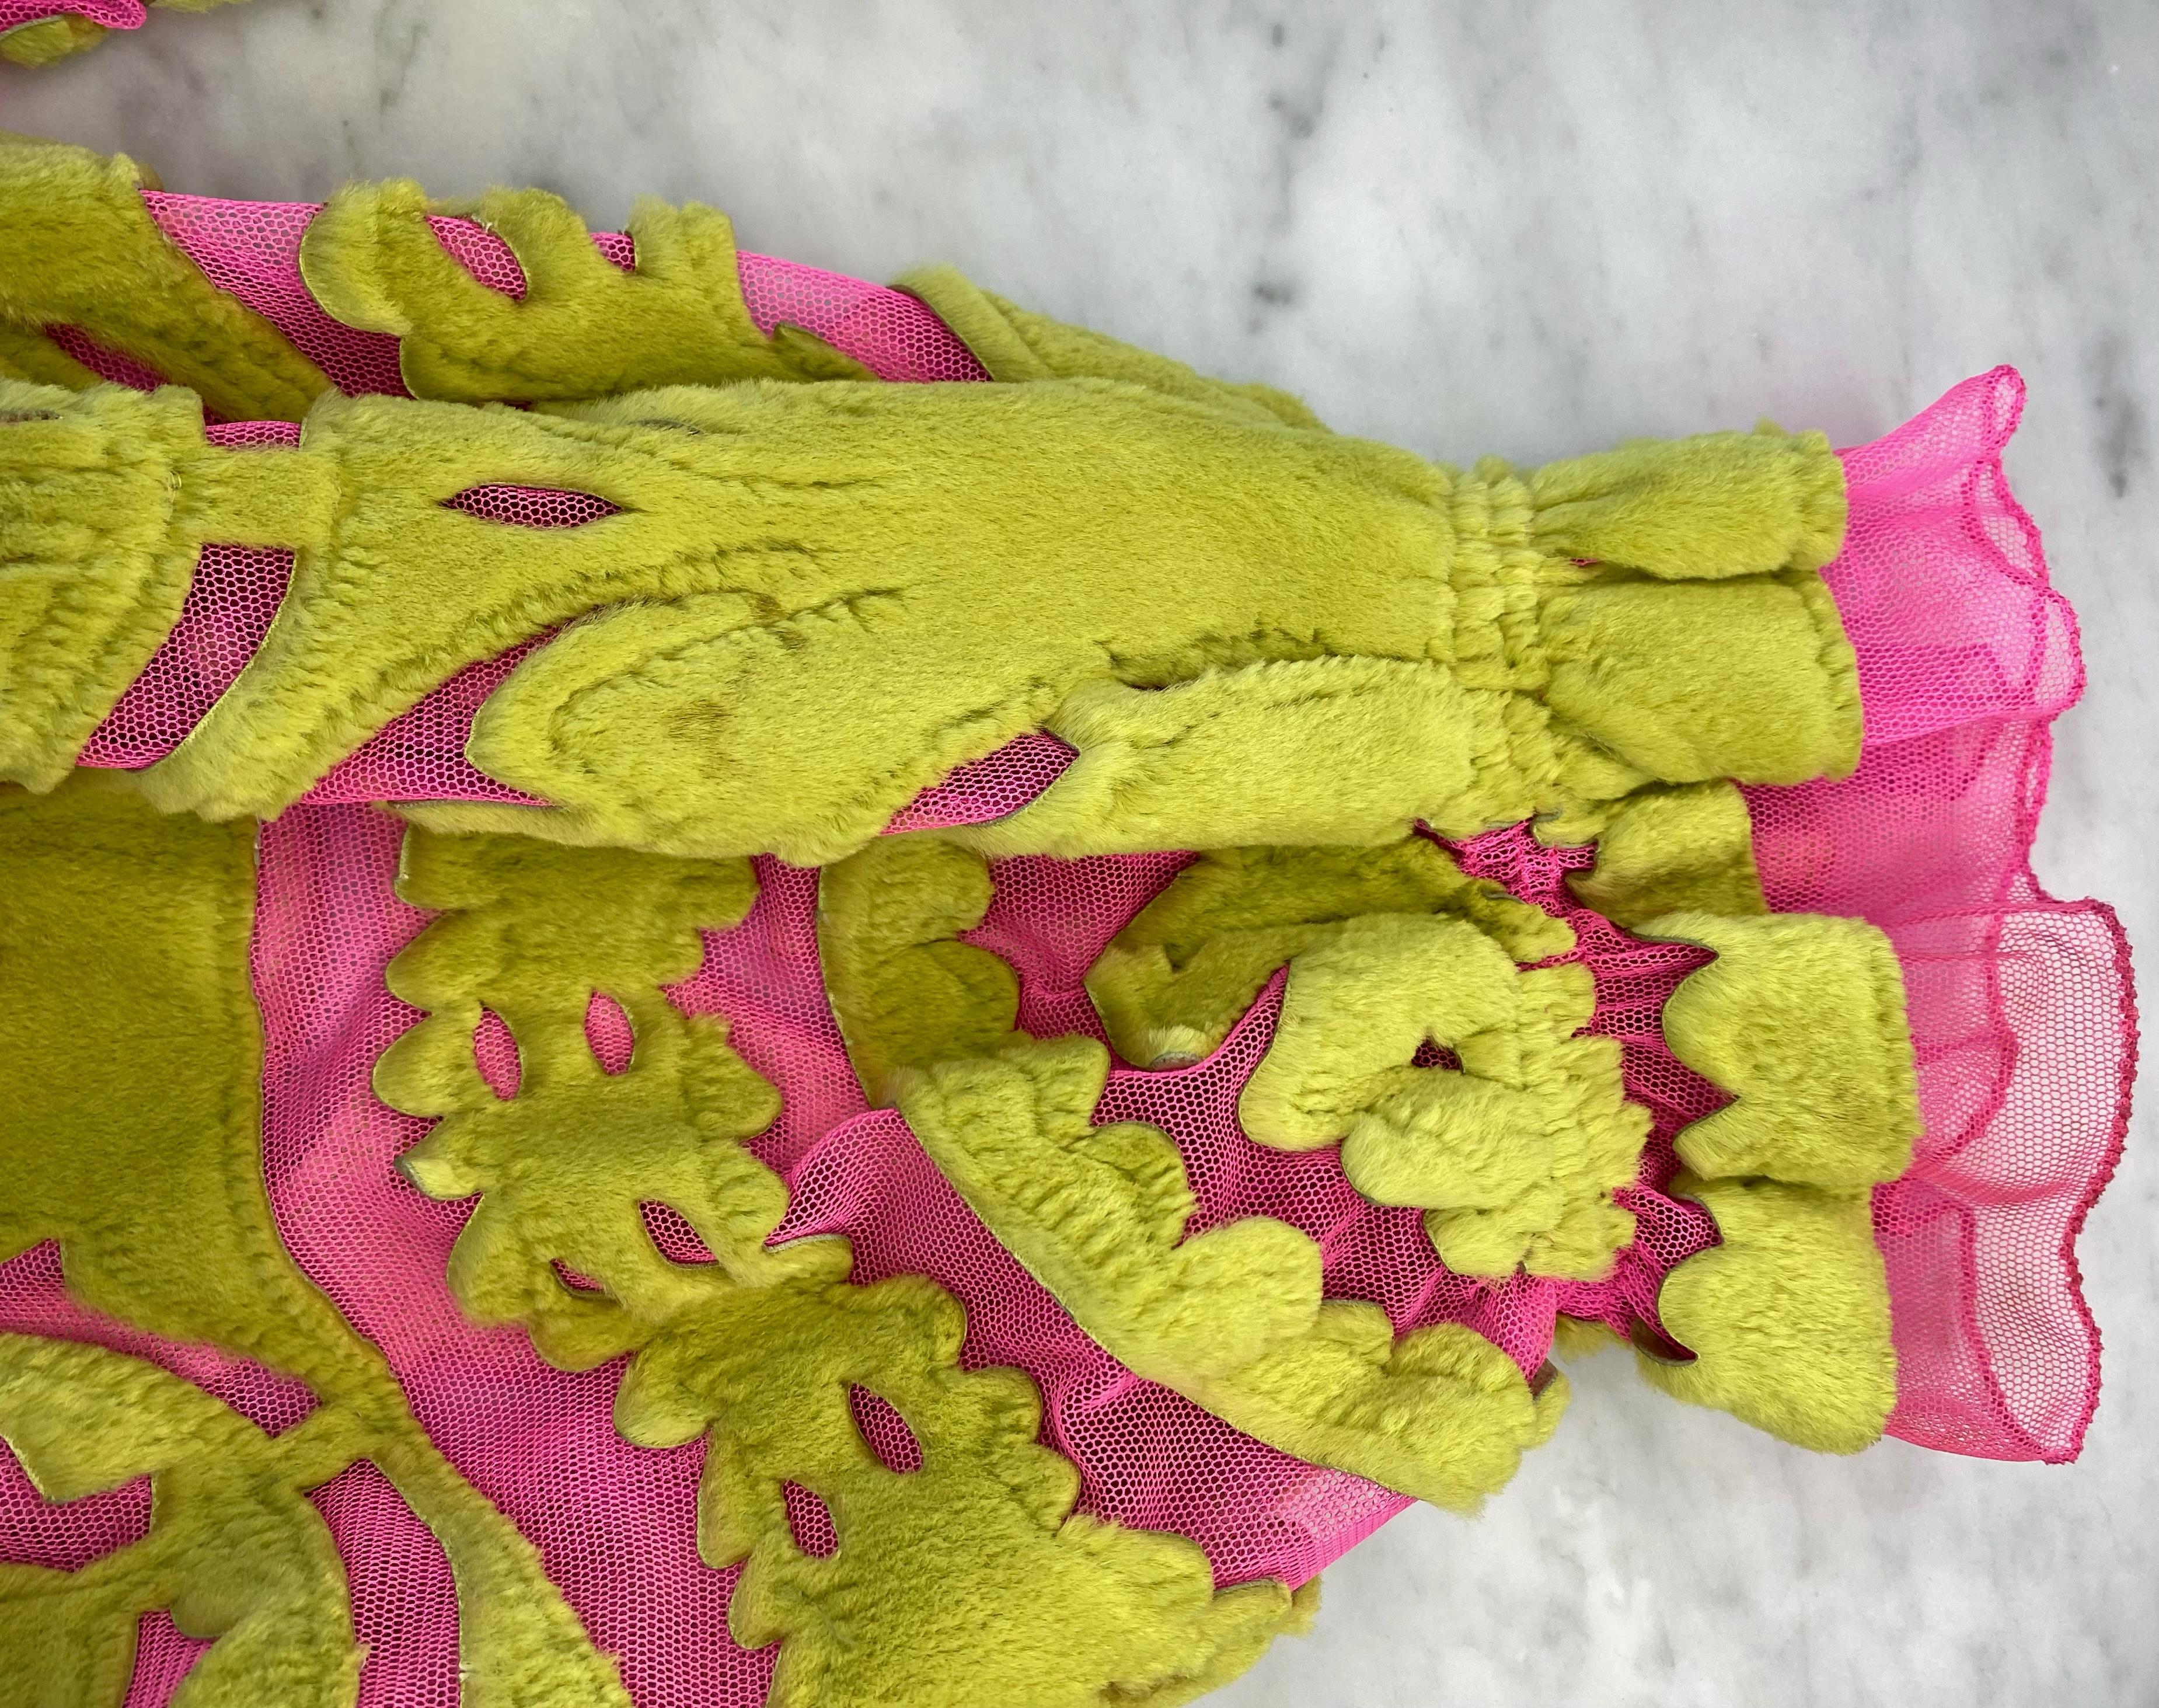 S/S 2000 Fendi by Karl Lagerfeld Neon Pink Blouse with Green Rabbit Fur Accents In Good Condition For Sale In West Hollywood, CA